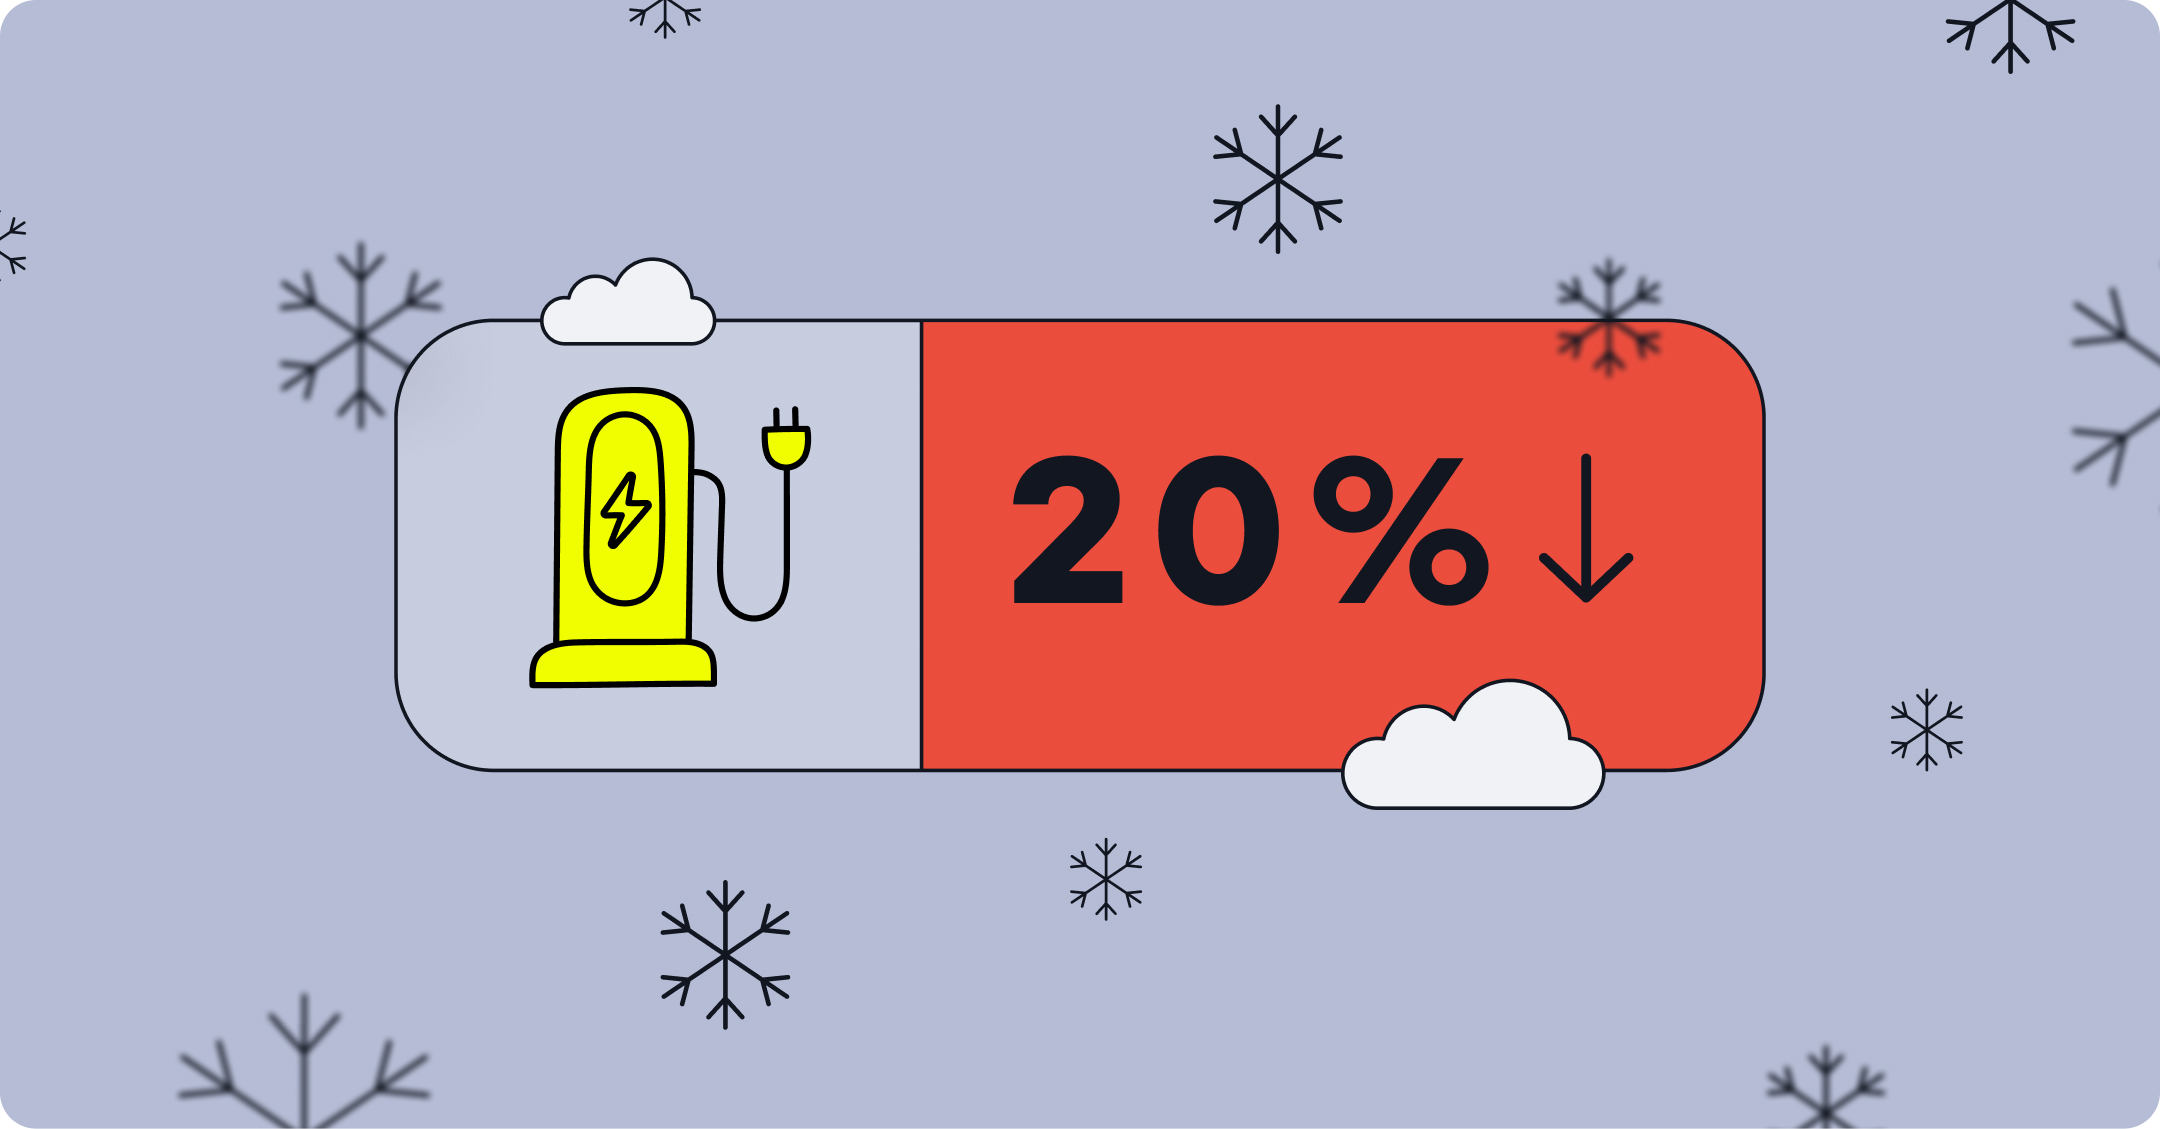 Never let your charge drop below 20 percent in the winter